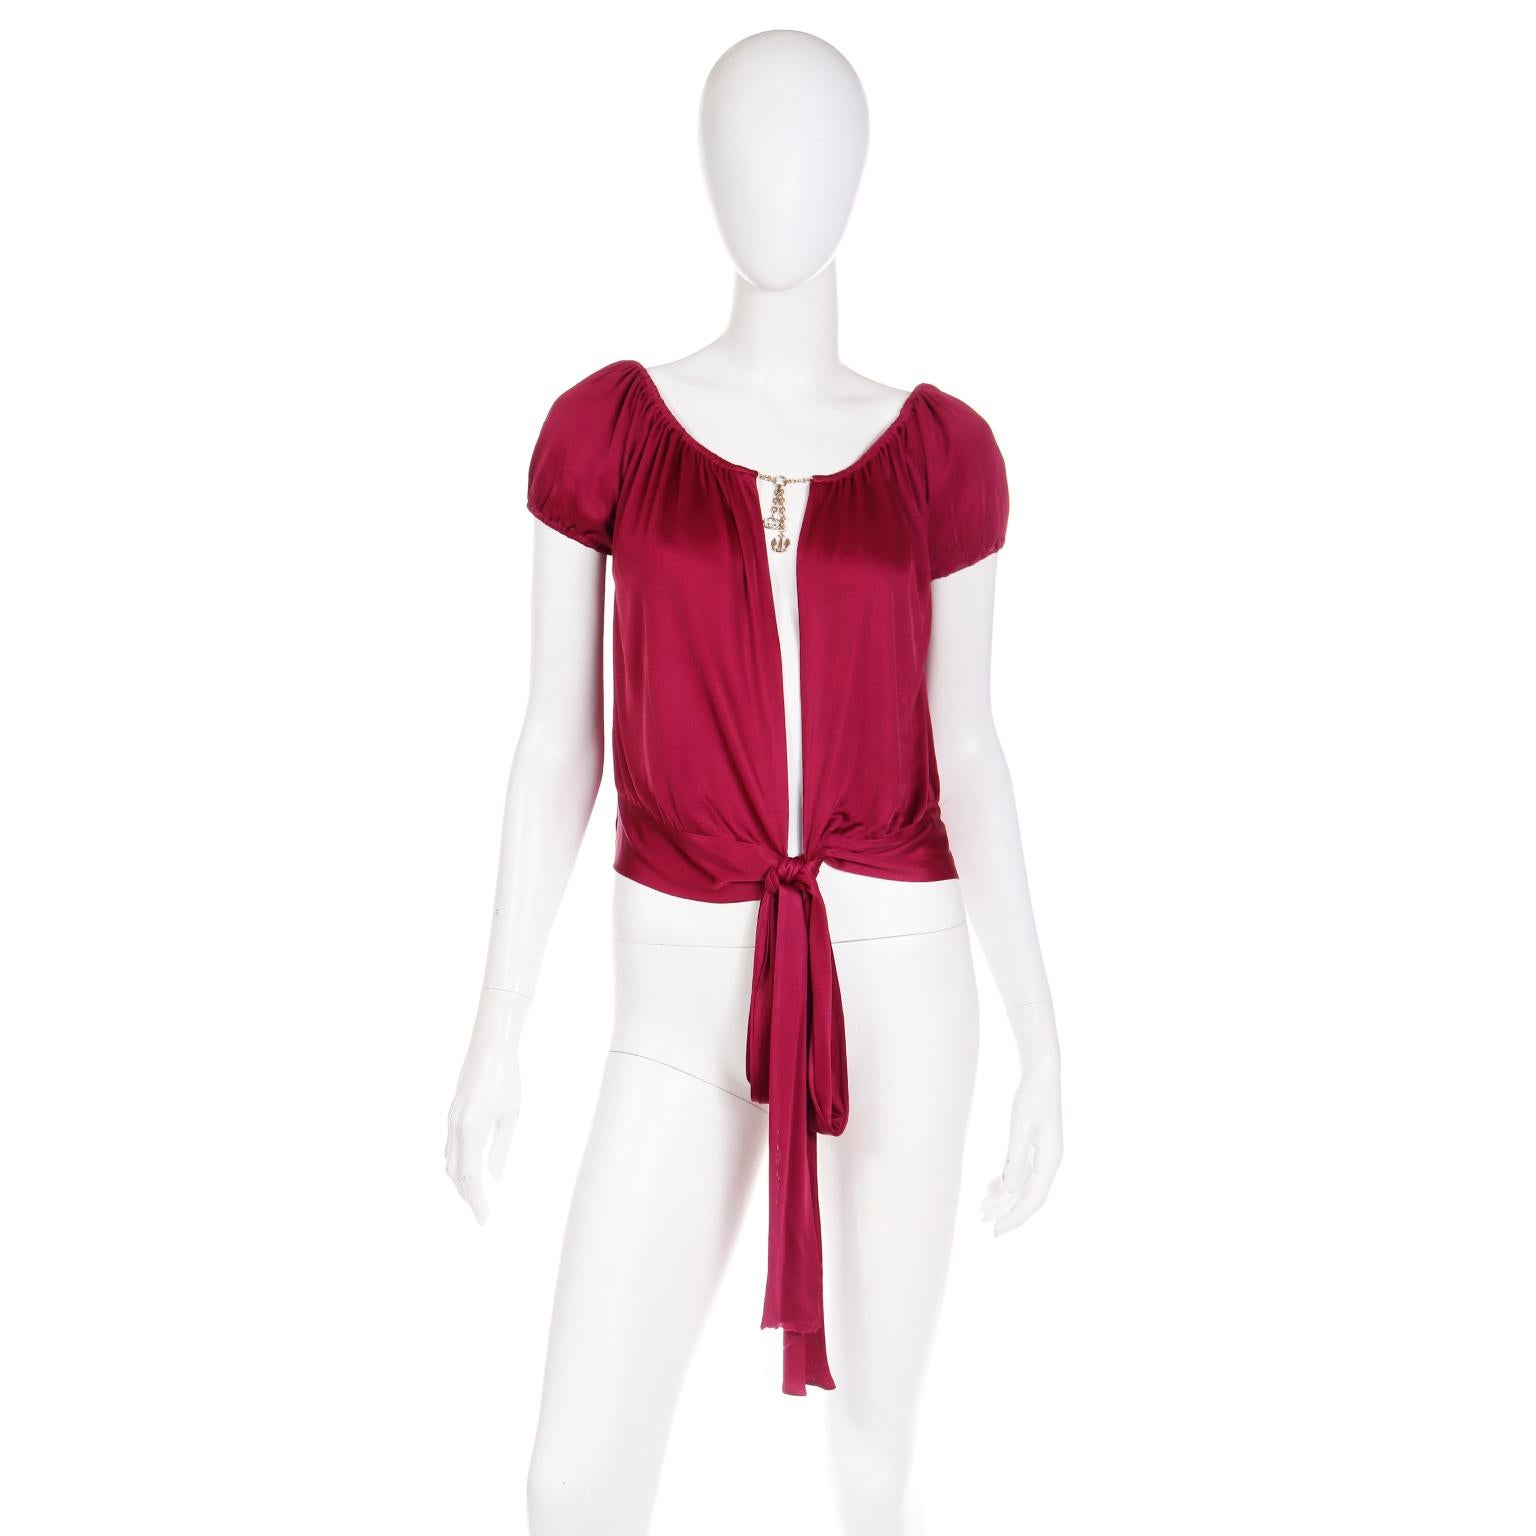 This exquisite burgundy short sleeve Gucci top is a statement piece with its gold GG logo and anchor charms dangling from the chain that connects each side of the neckline. The top is daringly open down the center below the charms and it has a sash